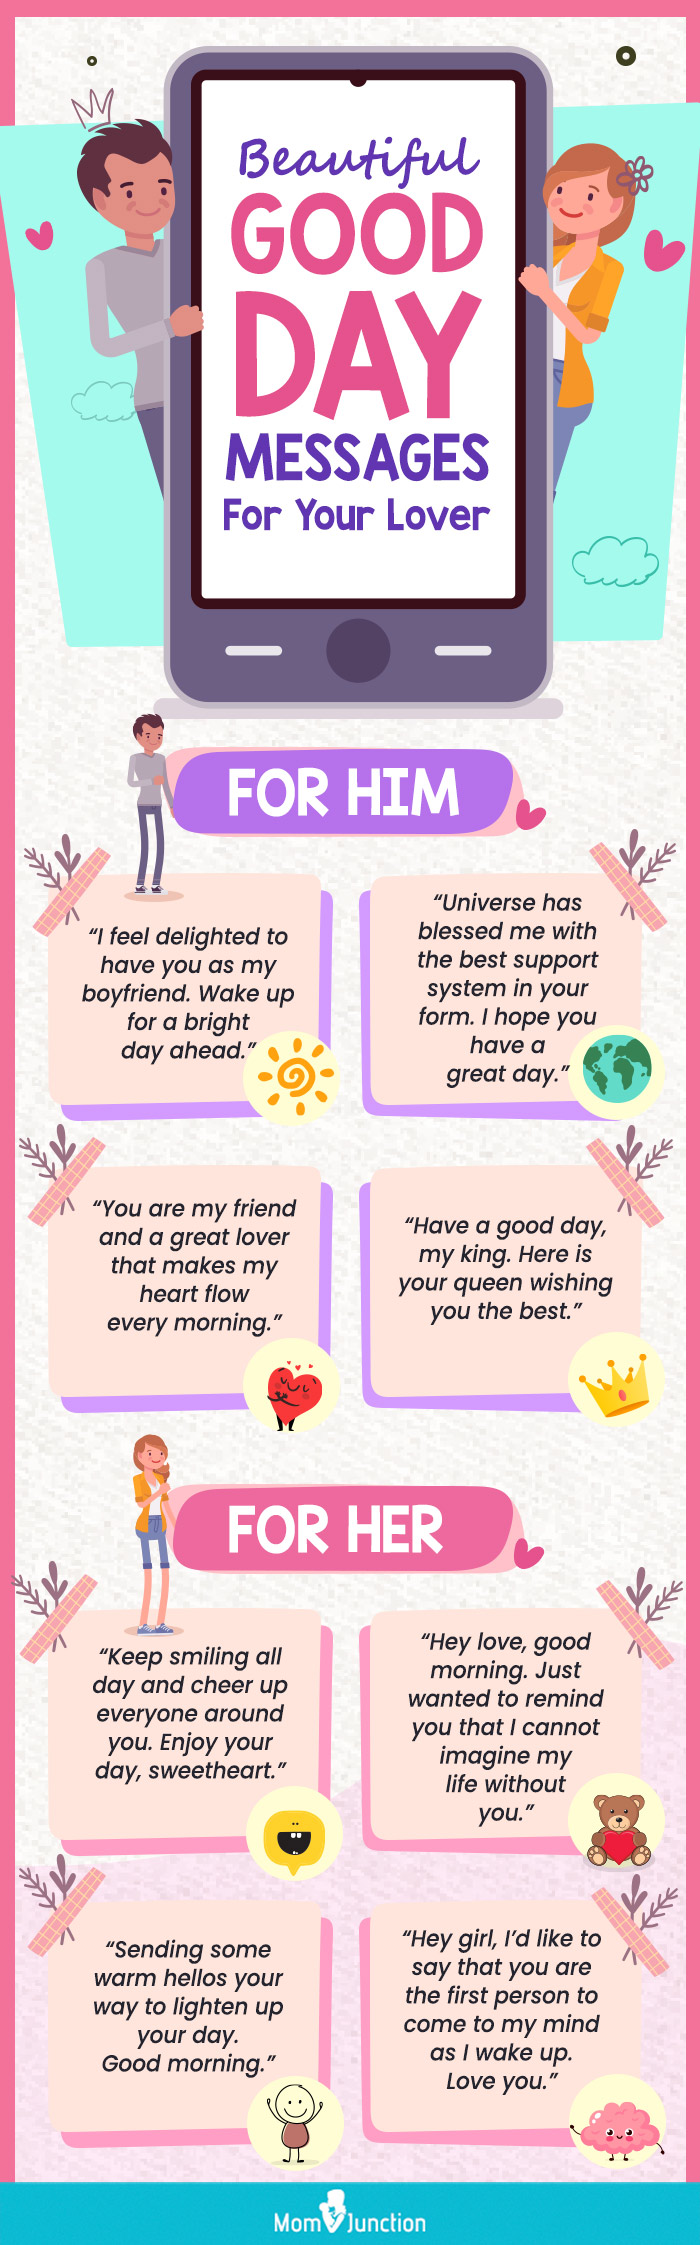 beautiful good day messages for your lover (infographic)